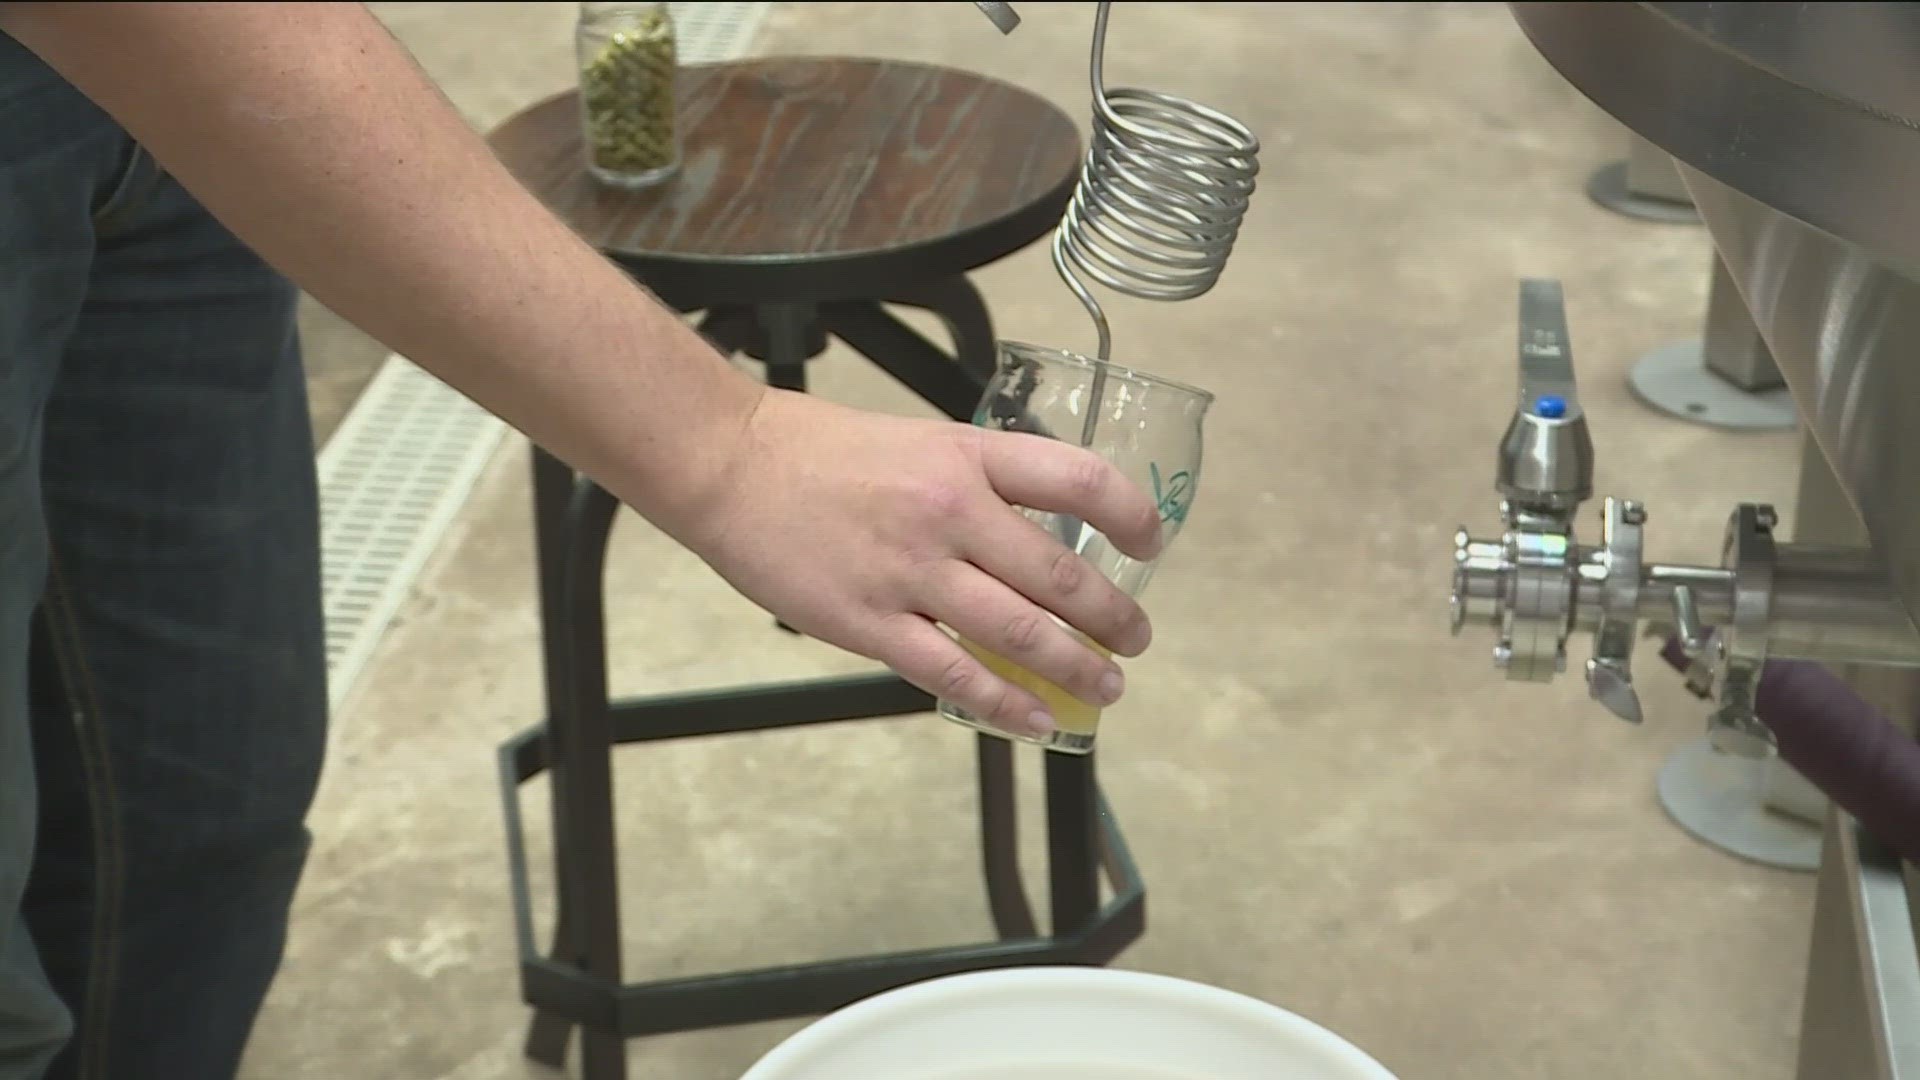 5NEWS REPORTER LAUREN SPENCER TALKED WITH THE ARKANSAS BREWERS GUILD AND WITH ONE LOCAL BREWERY OWNER WHO SAYS HE'S READY FOR THE HISTORIC EVENT TO HIT HIS BUSINESS